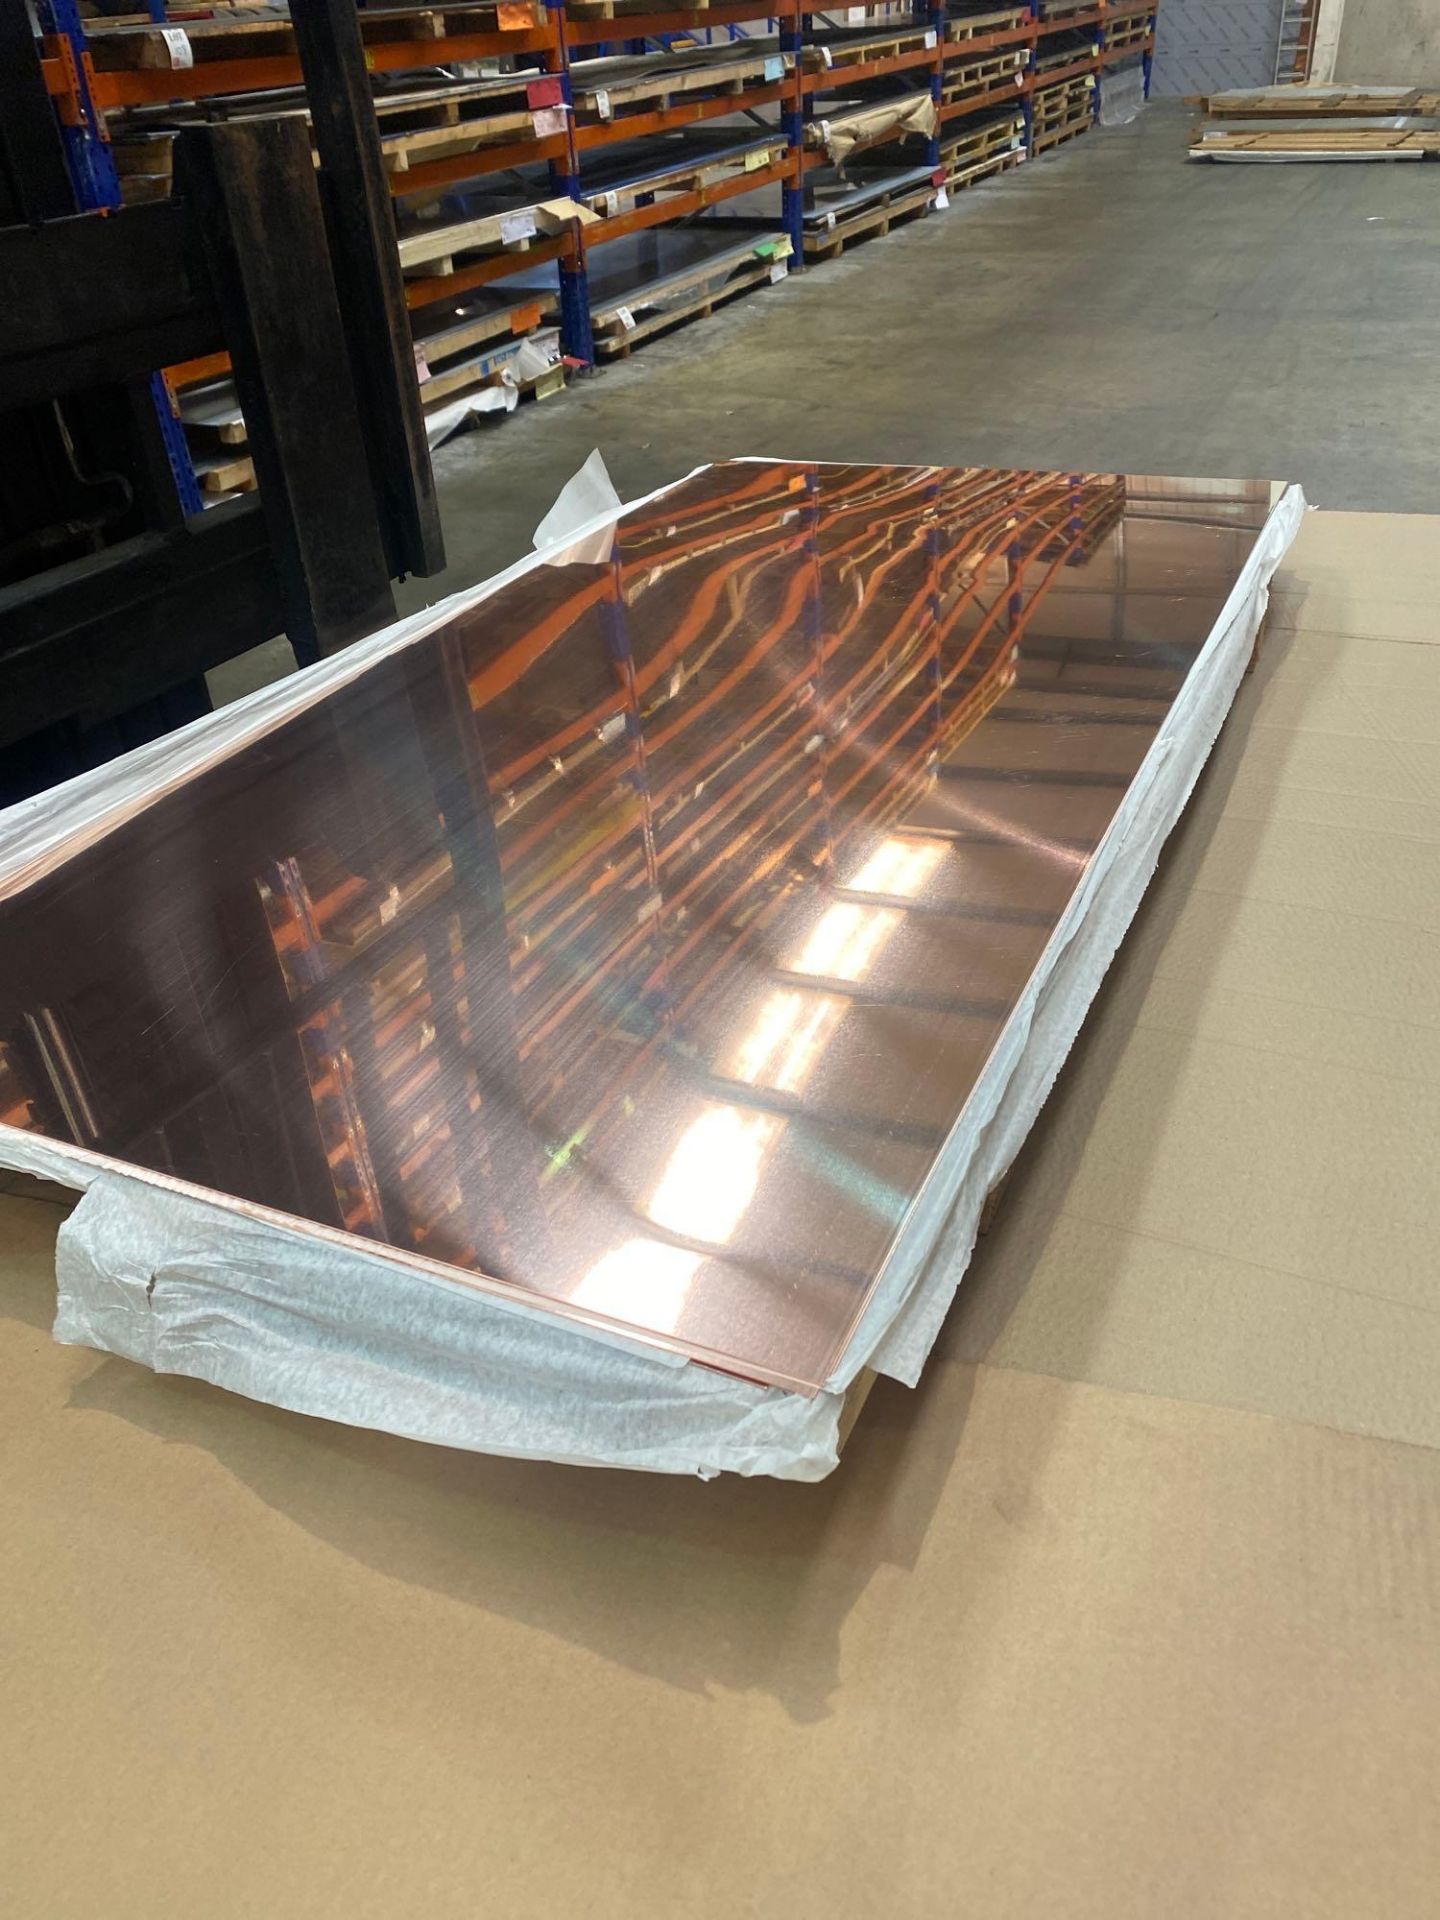 8 sheets of 4’- 2’ , 0.55mm C106 copper and 4 sheets of 2-1m, 0.9mm C101 copper. Any metal stock